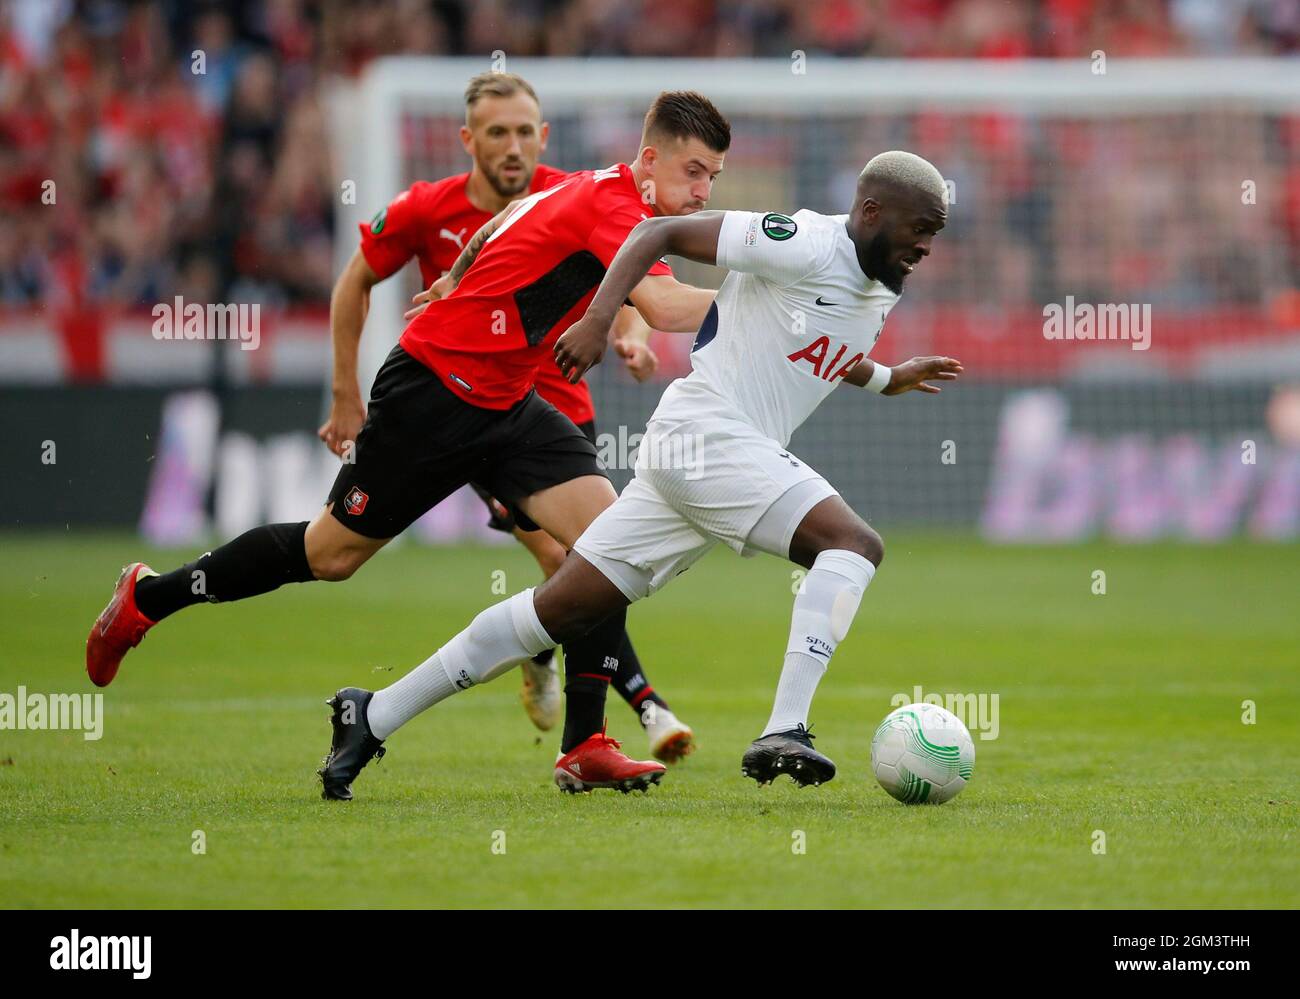 Soccer Football - Europa Conference League - Group G - Stade Rennes v  Tottenham Hotspur - Roazhon Park, Rennes, France - September 16, 2021  Tottenham Hotspur's Tanguy Ndombele in action with Stade